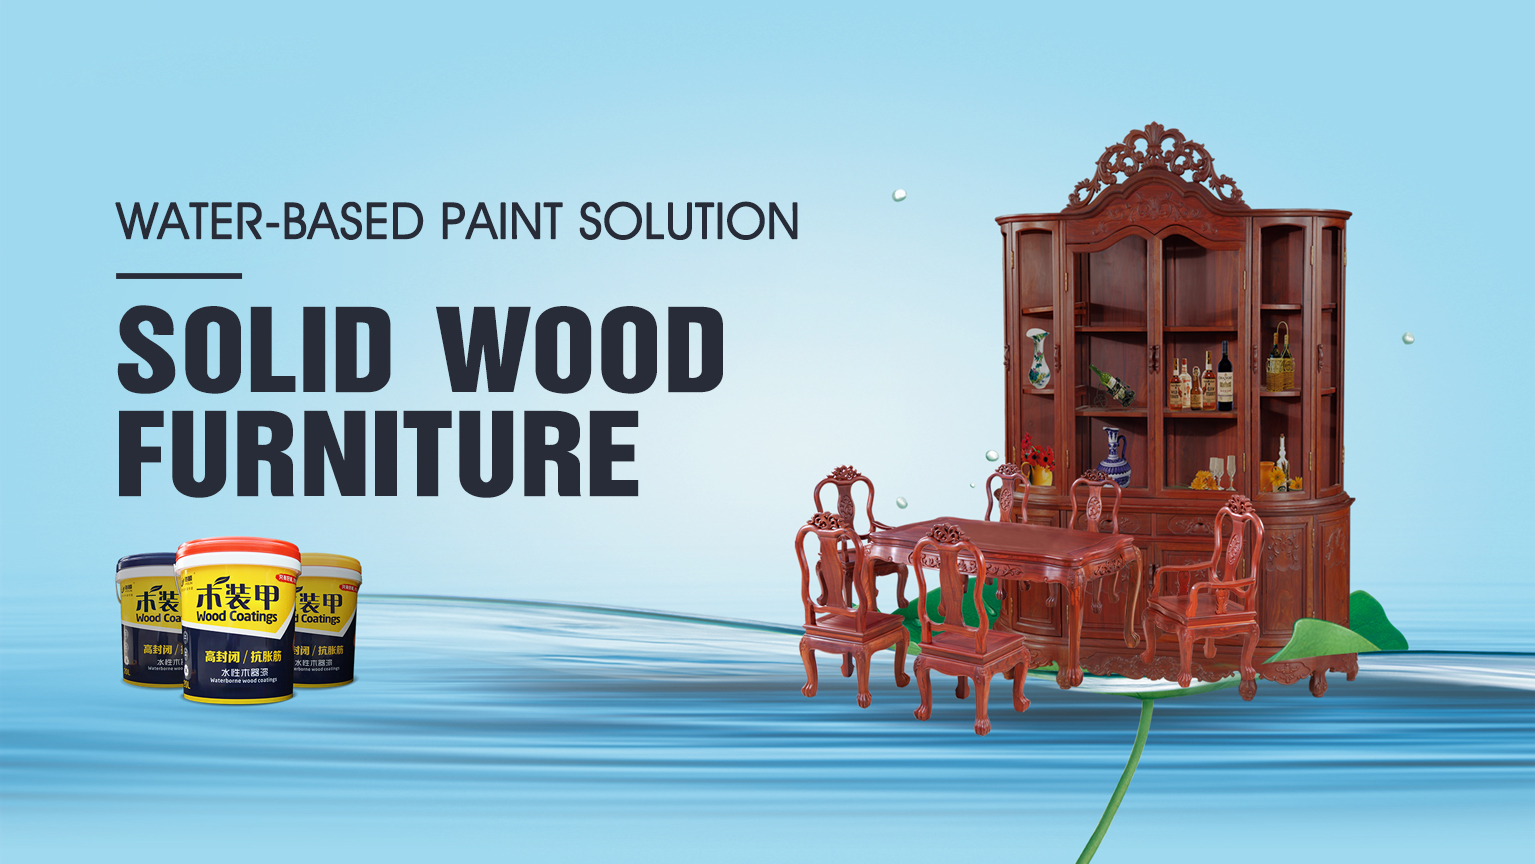 Solid wood furniture water-based paint solution